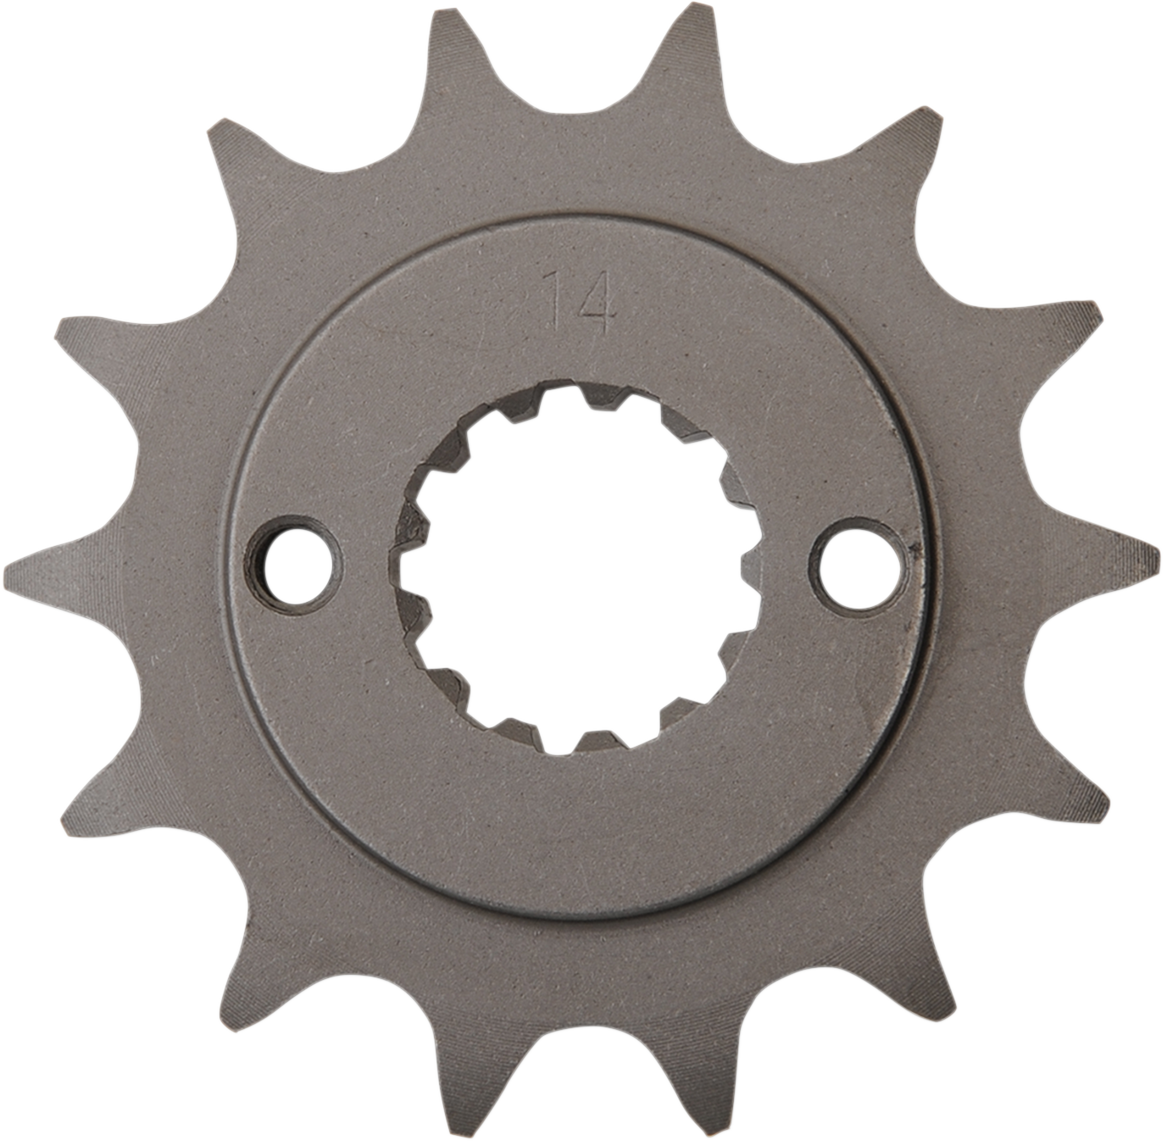 Parts Unlimited Countershaft Sprocket - 14-Tooth 13144-1163-14t